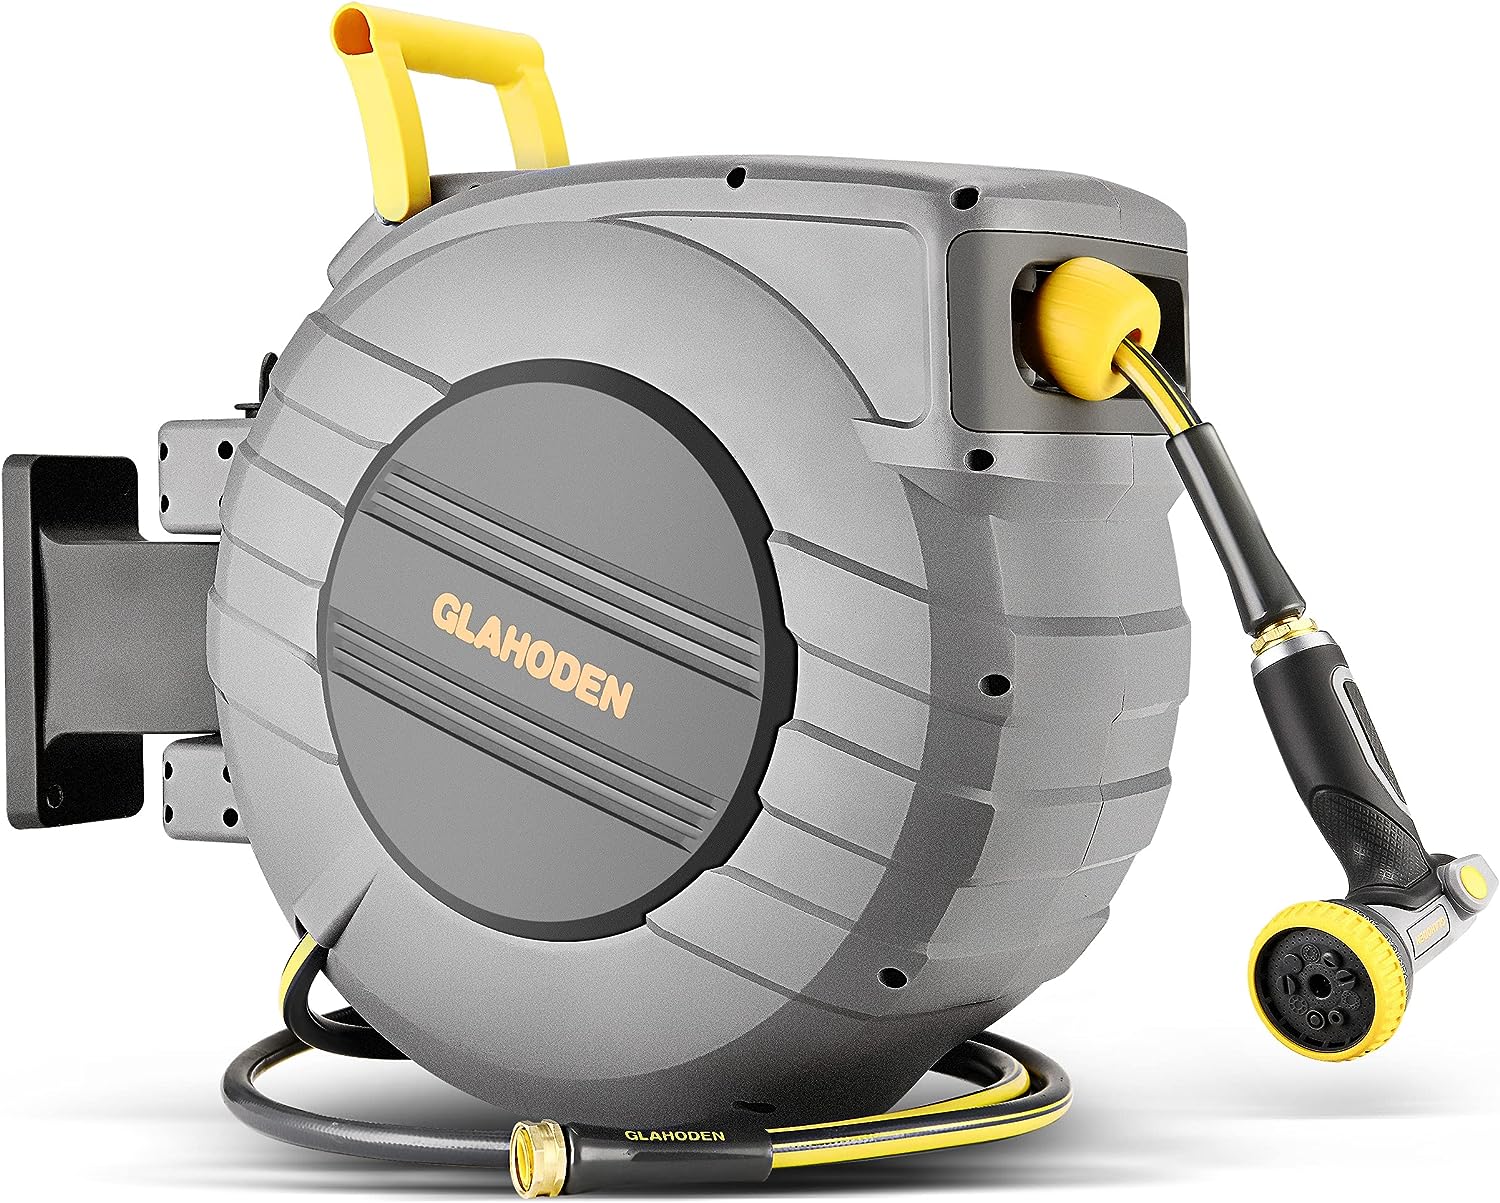 GLAHODEN Retractable Garden Hose Reel, 1/2in x 140ft+6ft Increase Flow Rate  By 20